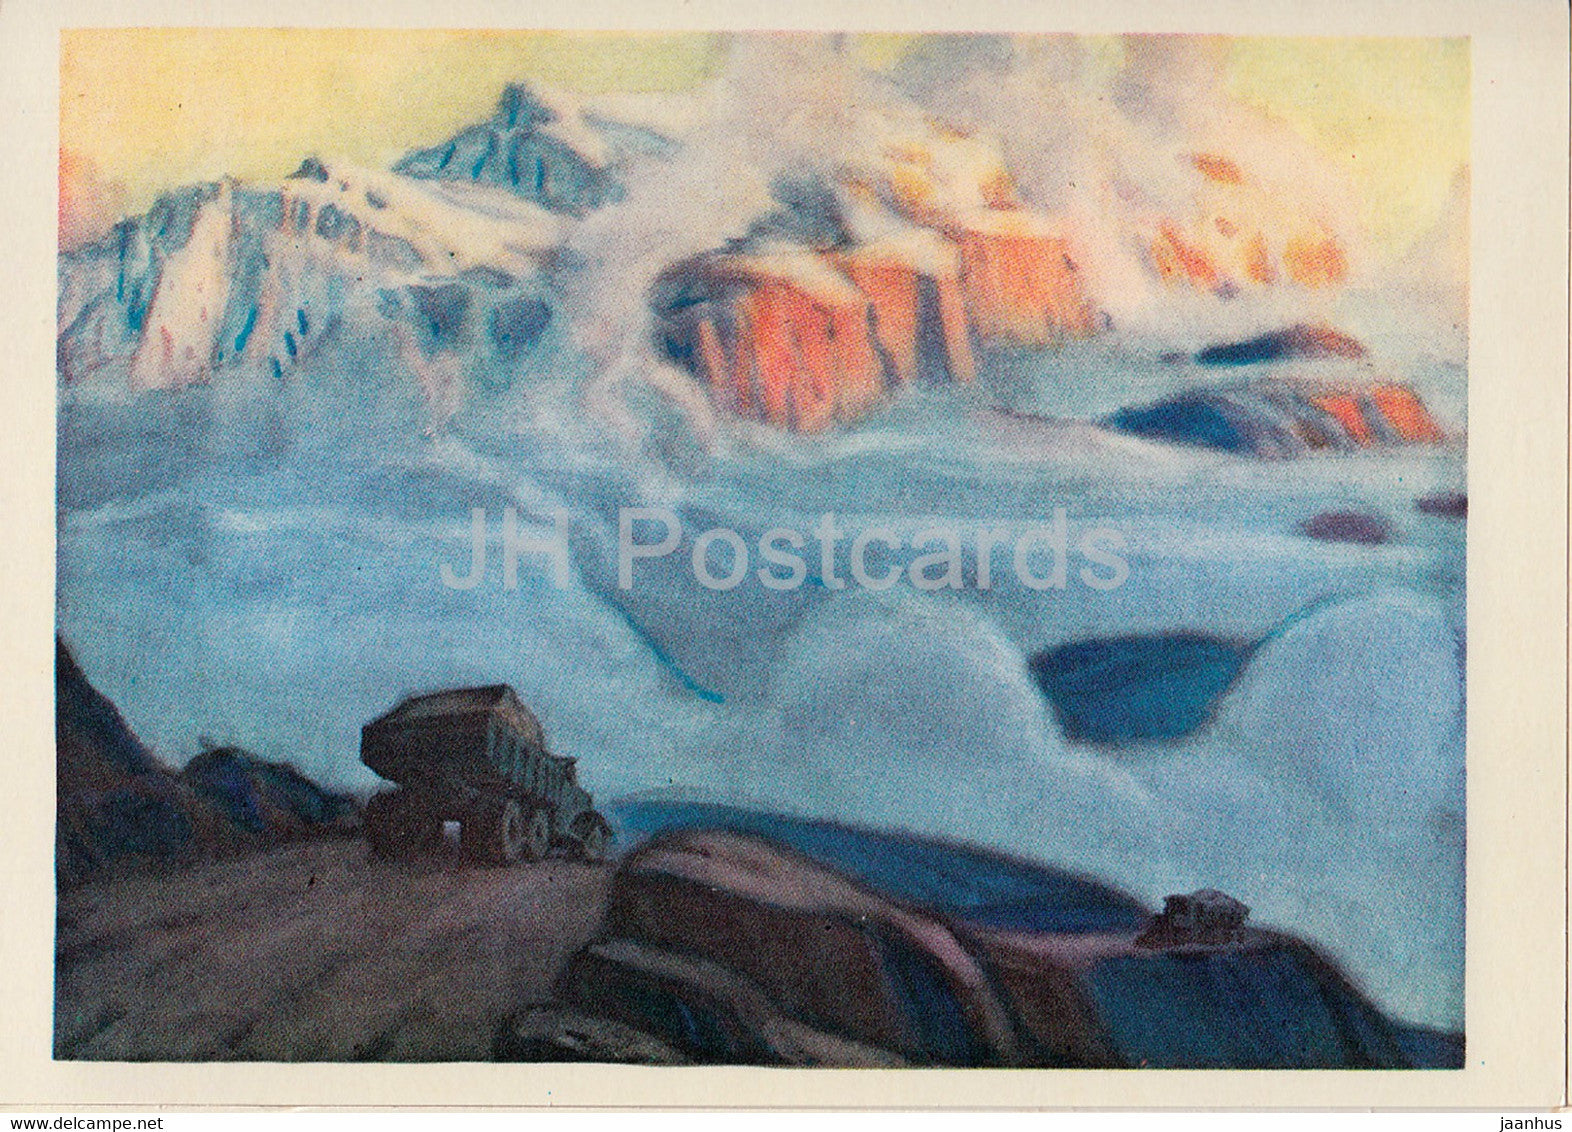 across Kyrgyzstan by V. Rogachev - on the road to Chetkal valley - illustration - 1979 - Russia USSR - unused - JH Postcards